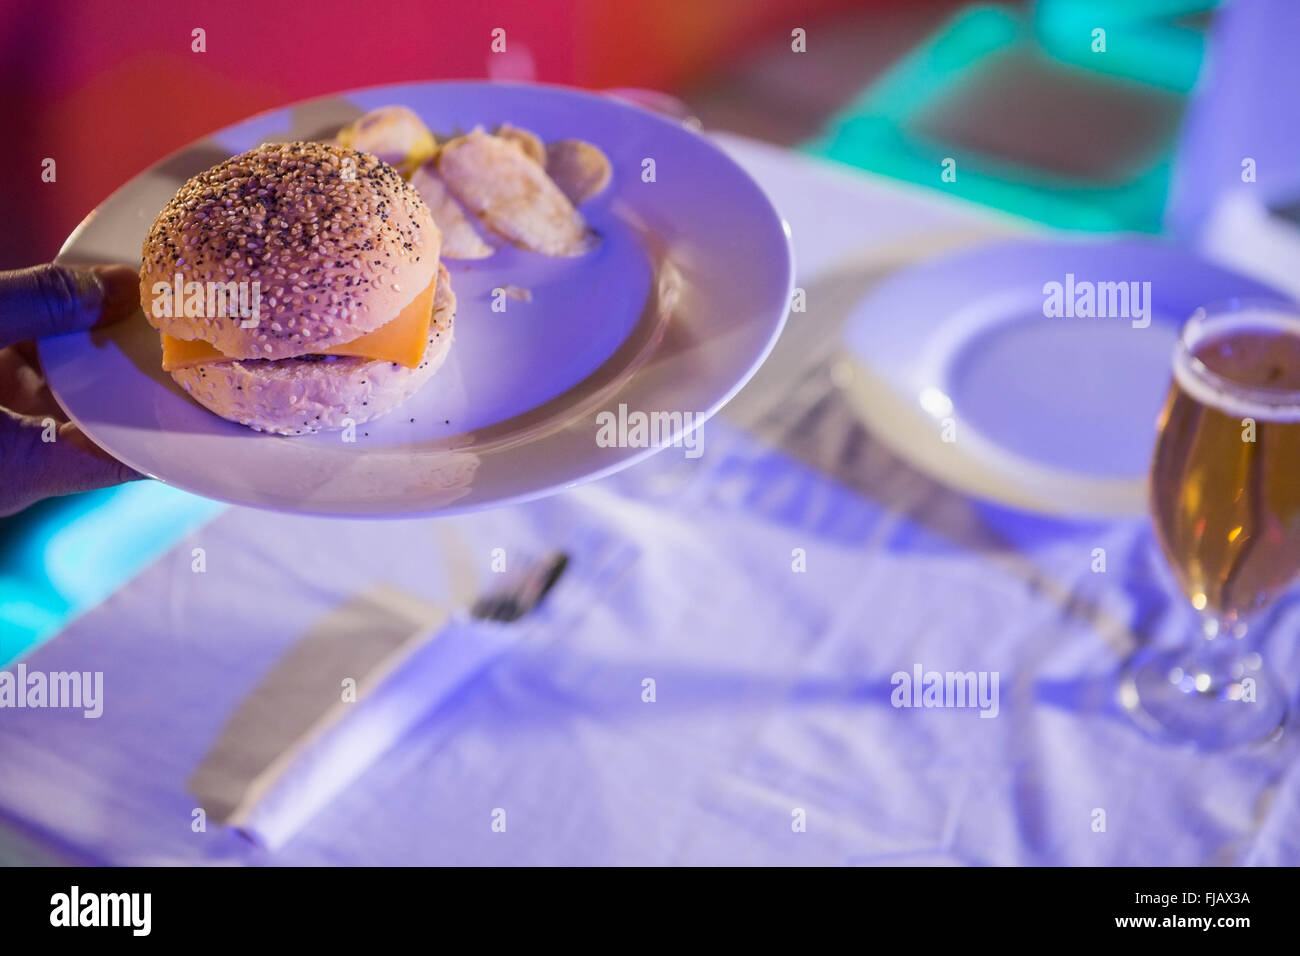 Plate of burger and beer glass on table Stock Photo